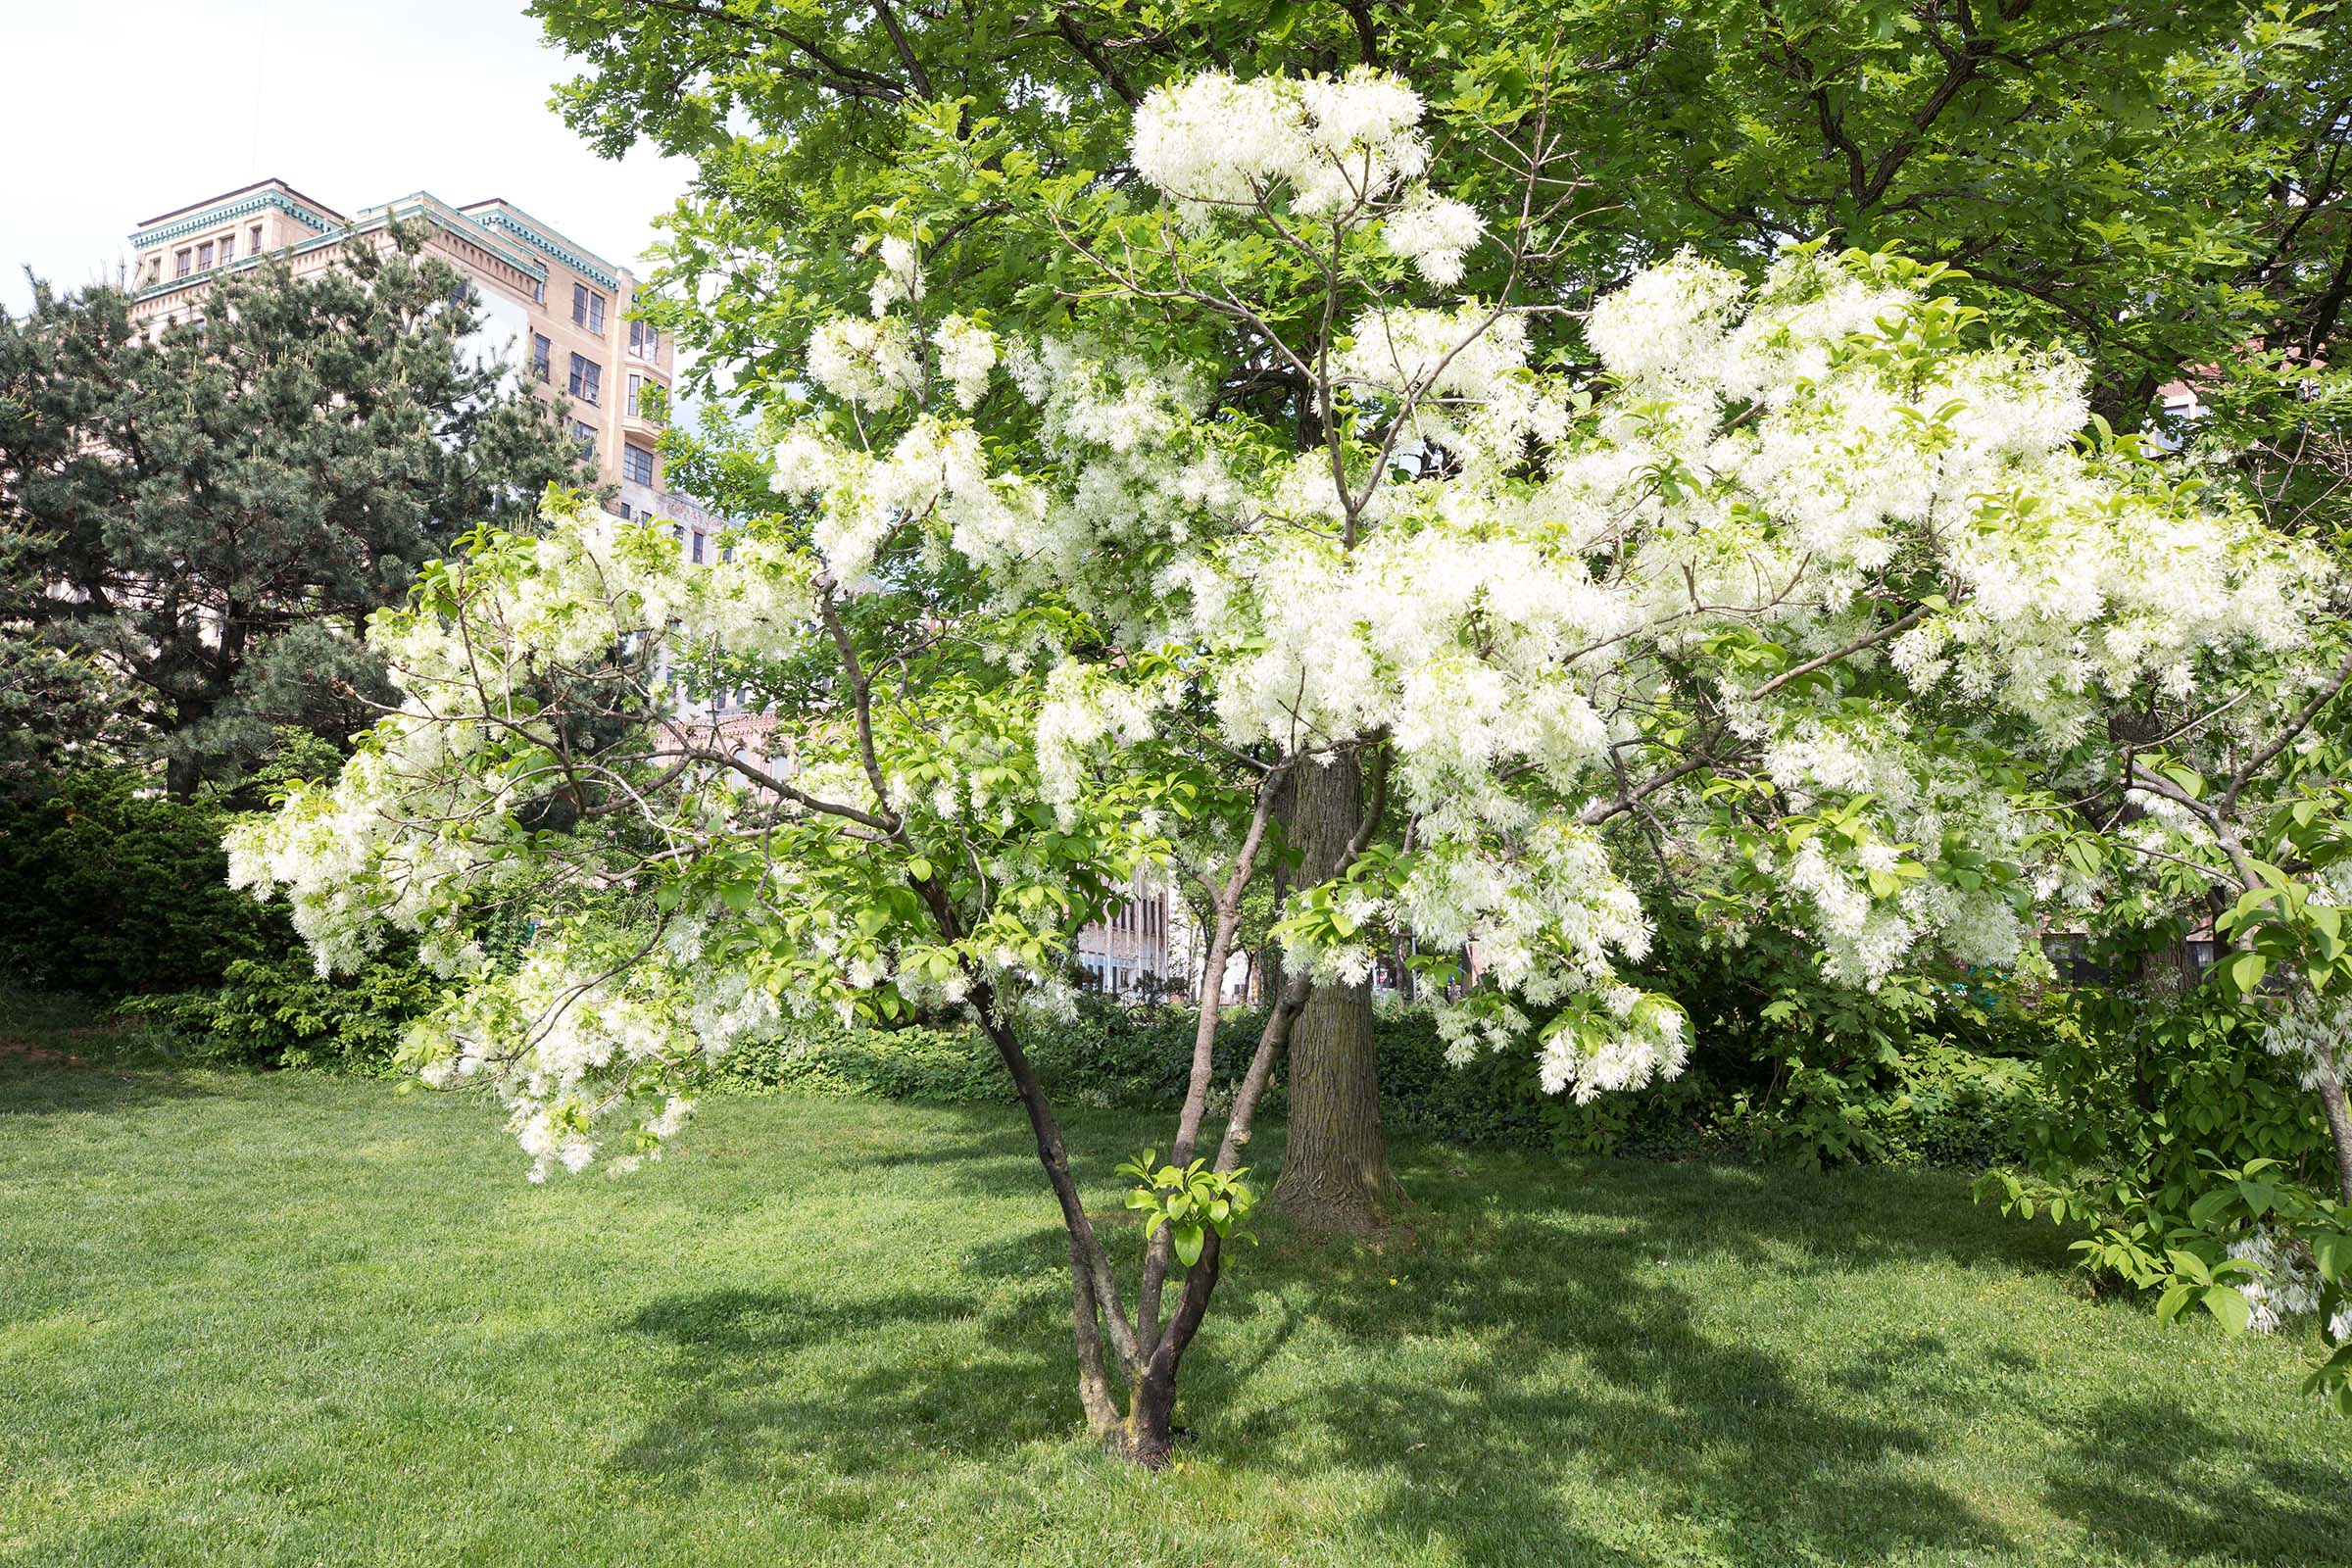 The fringe trees in Hudson River Park have white blossoms that resemble delicate spikes